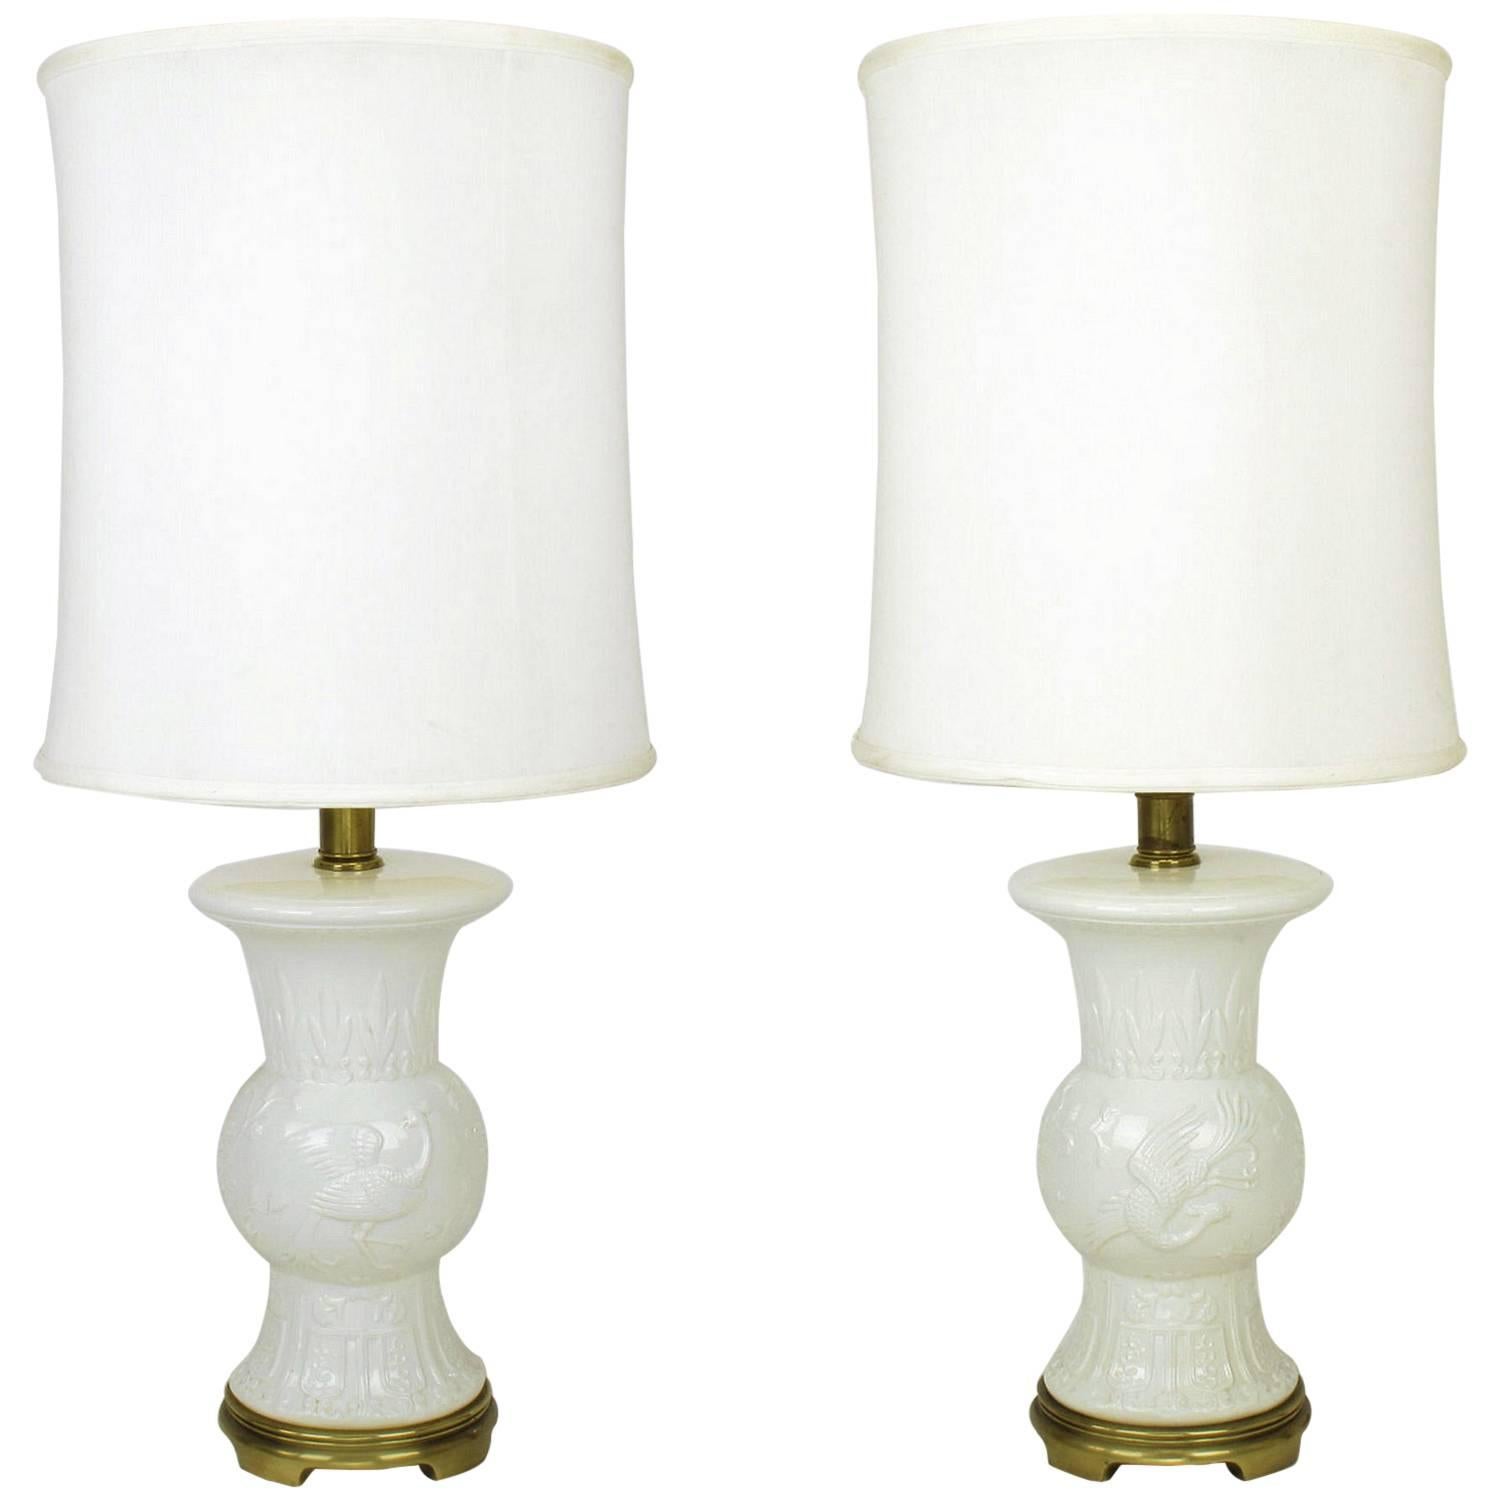 Pair of Frederick Cooper White Porcelain Table Lamps For Sale